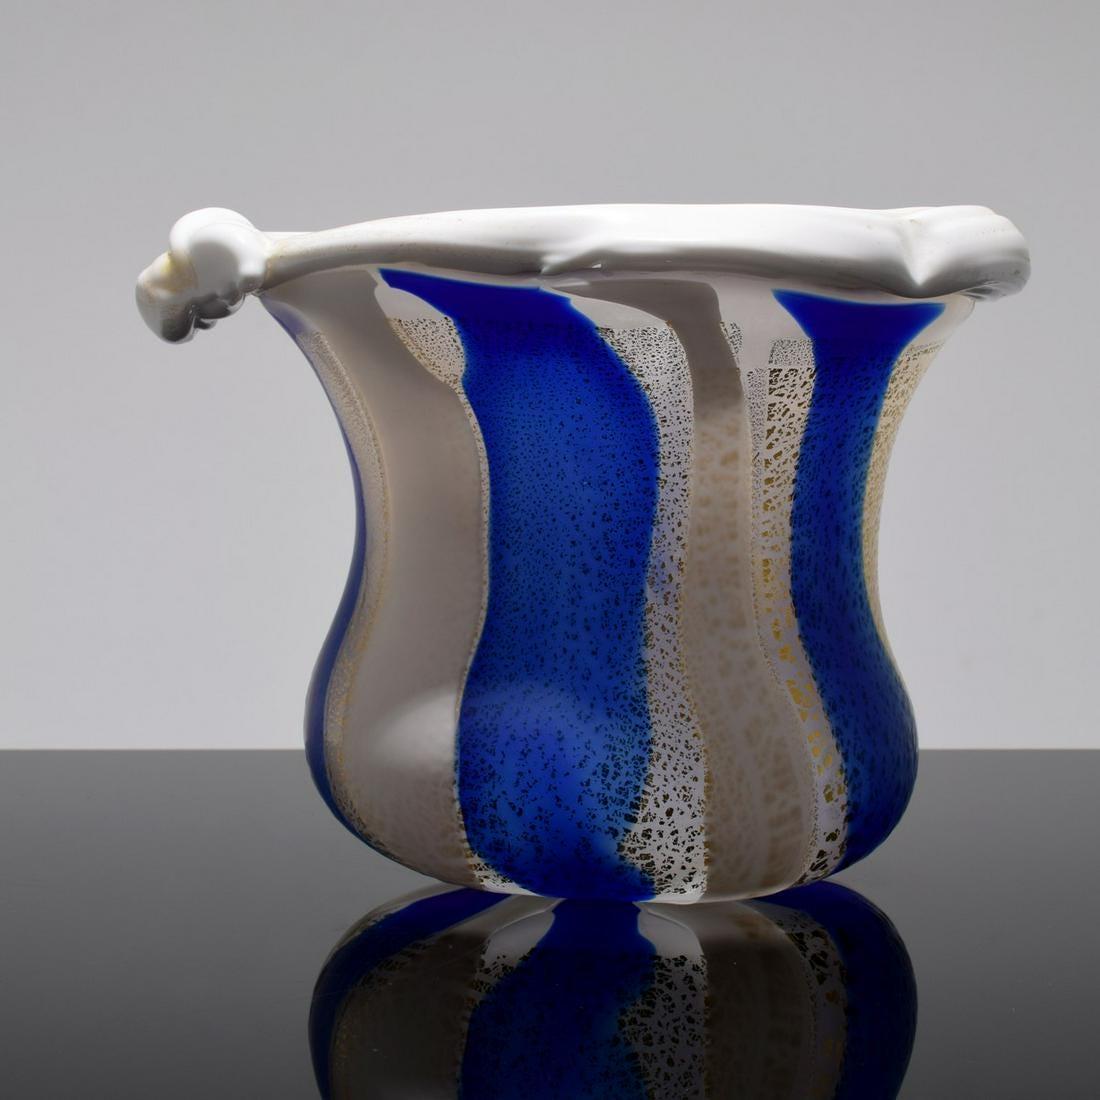 A free standing glass sculpture in an open vessel form by Kyohei Fujita (1921-2004). The striking piece features an organic body with alternative strips of blue, white and transparent strips with gold sparkle inlays. The rim takes a free biomorphic